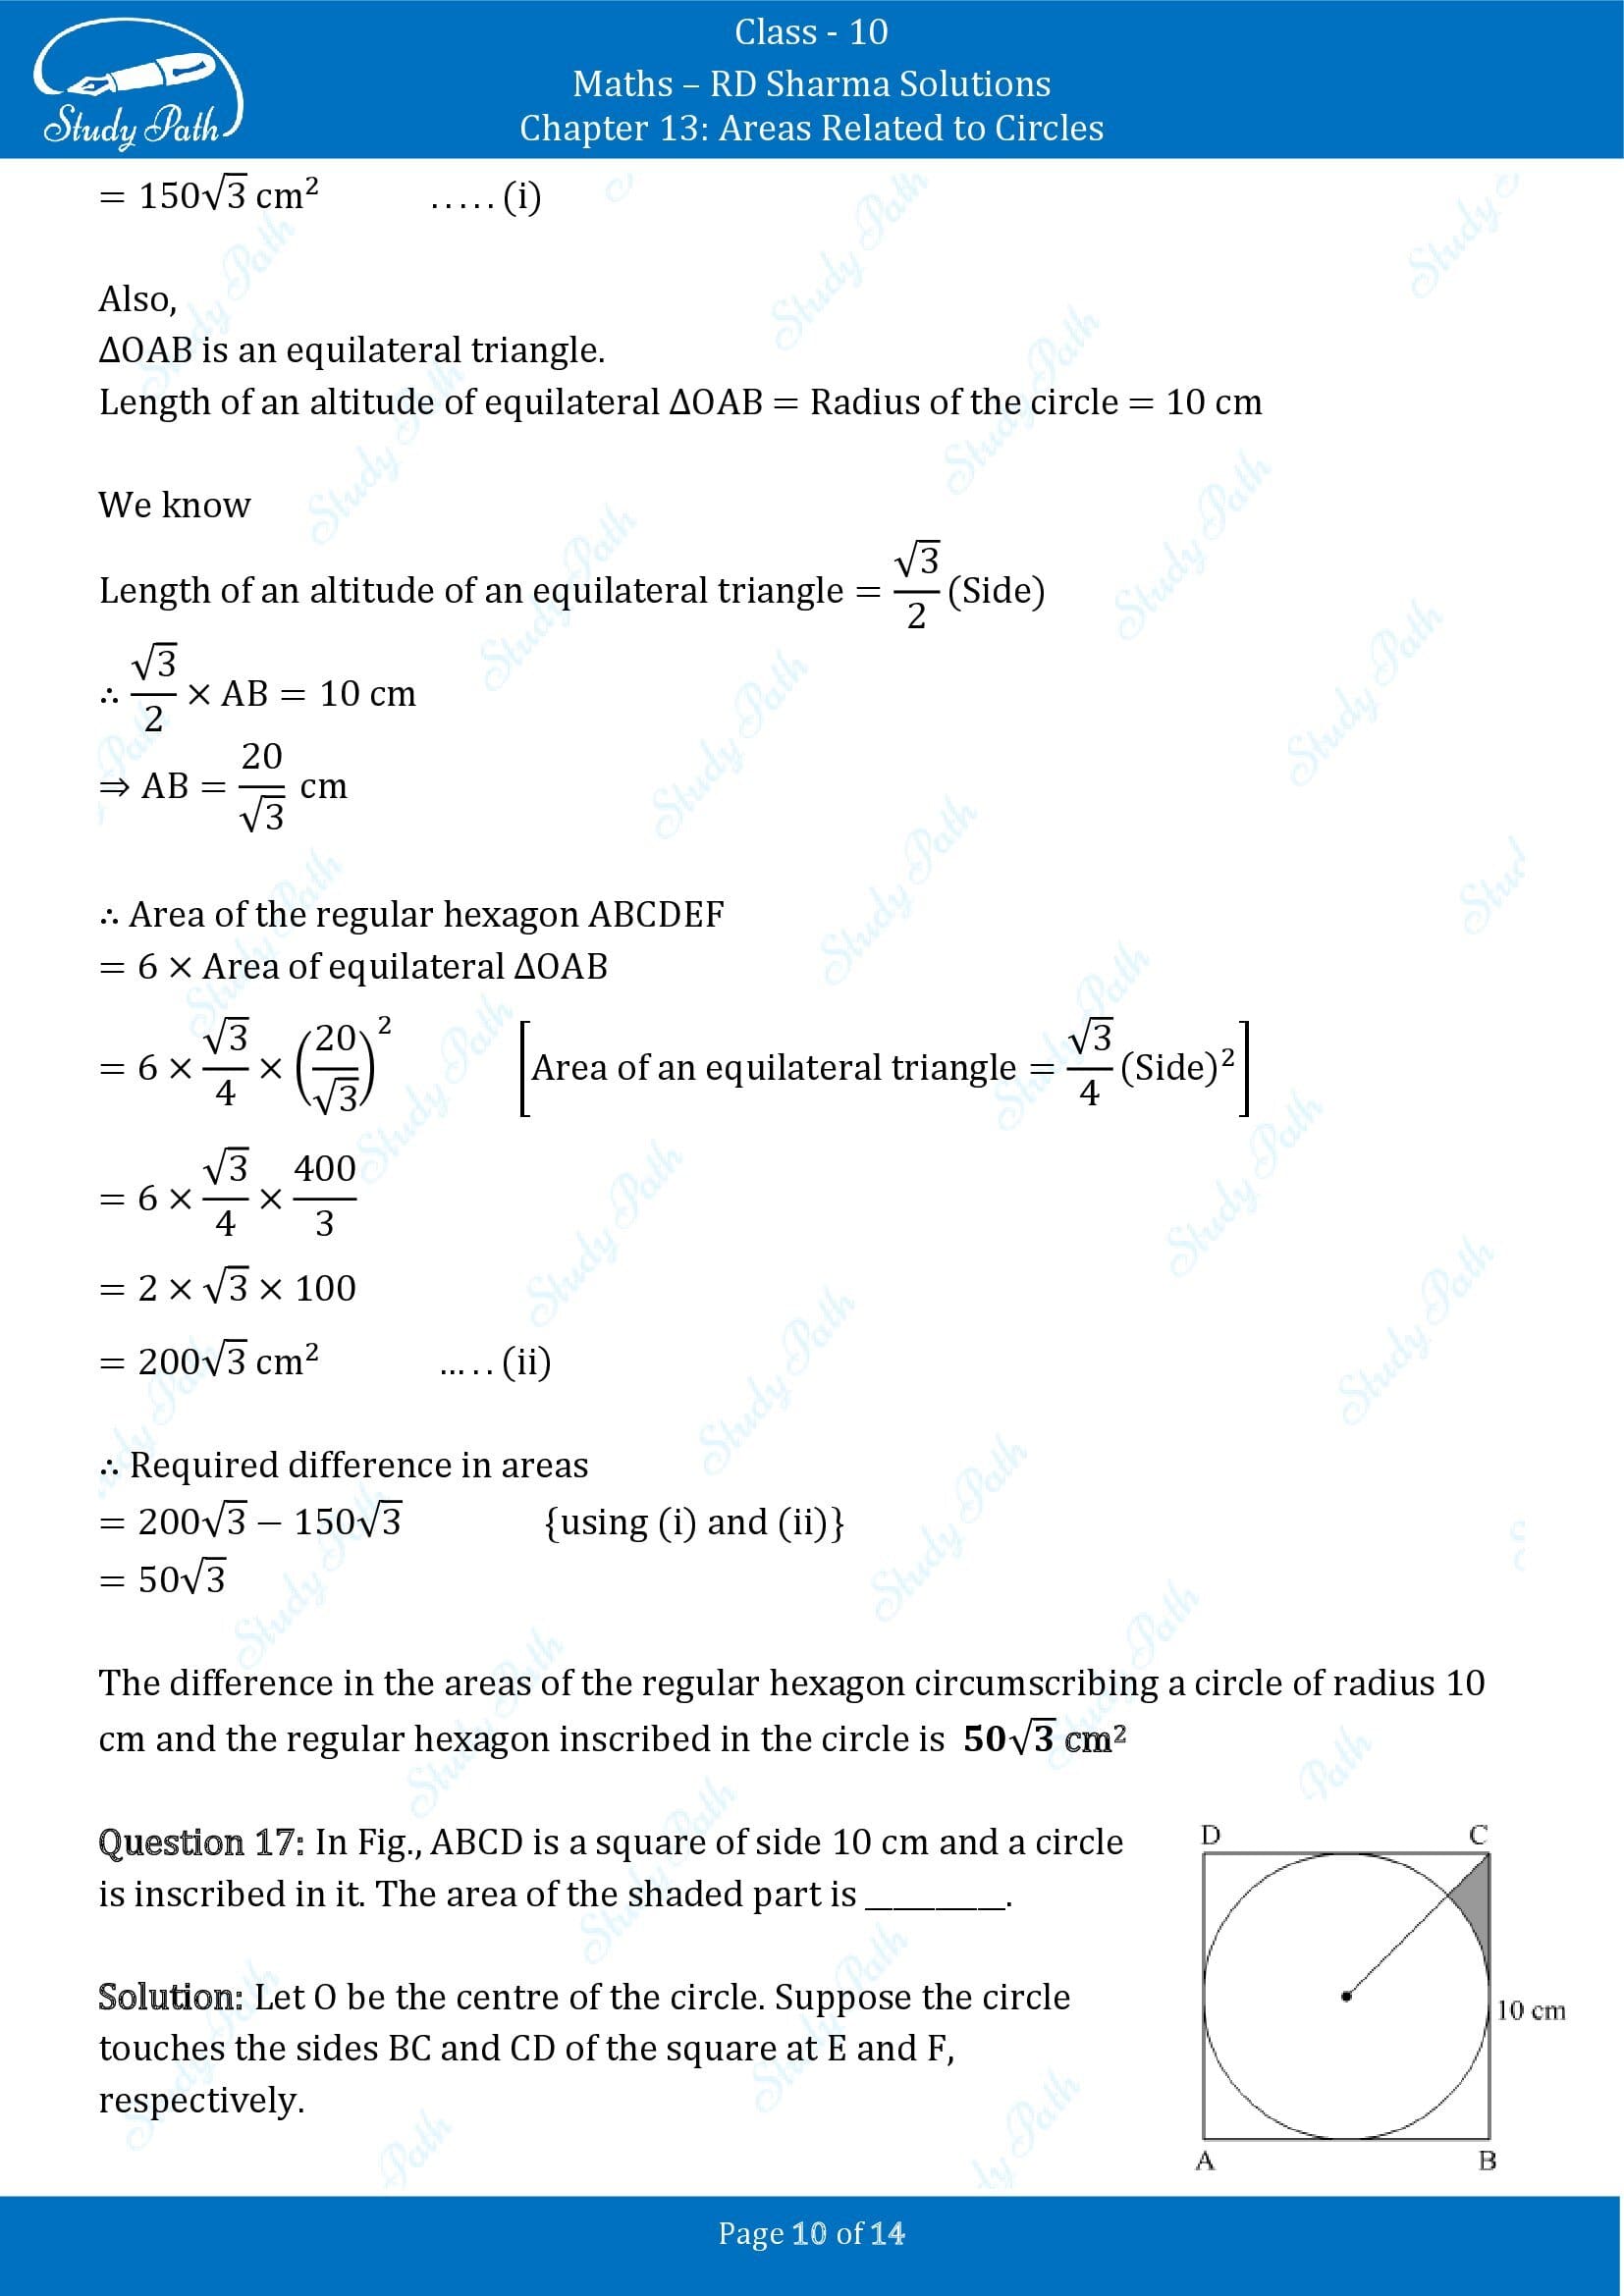 RD Sharma Solutions Class 10 Chapter 13 Areas Related to Circles Fill in the Blank Type Questions FBQs 00010